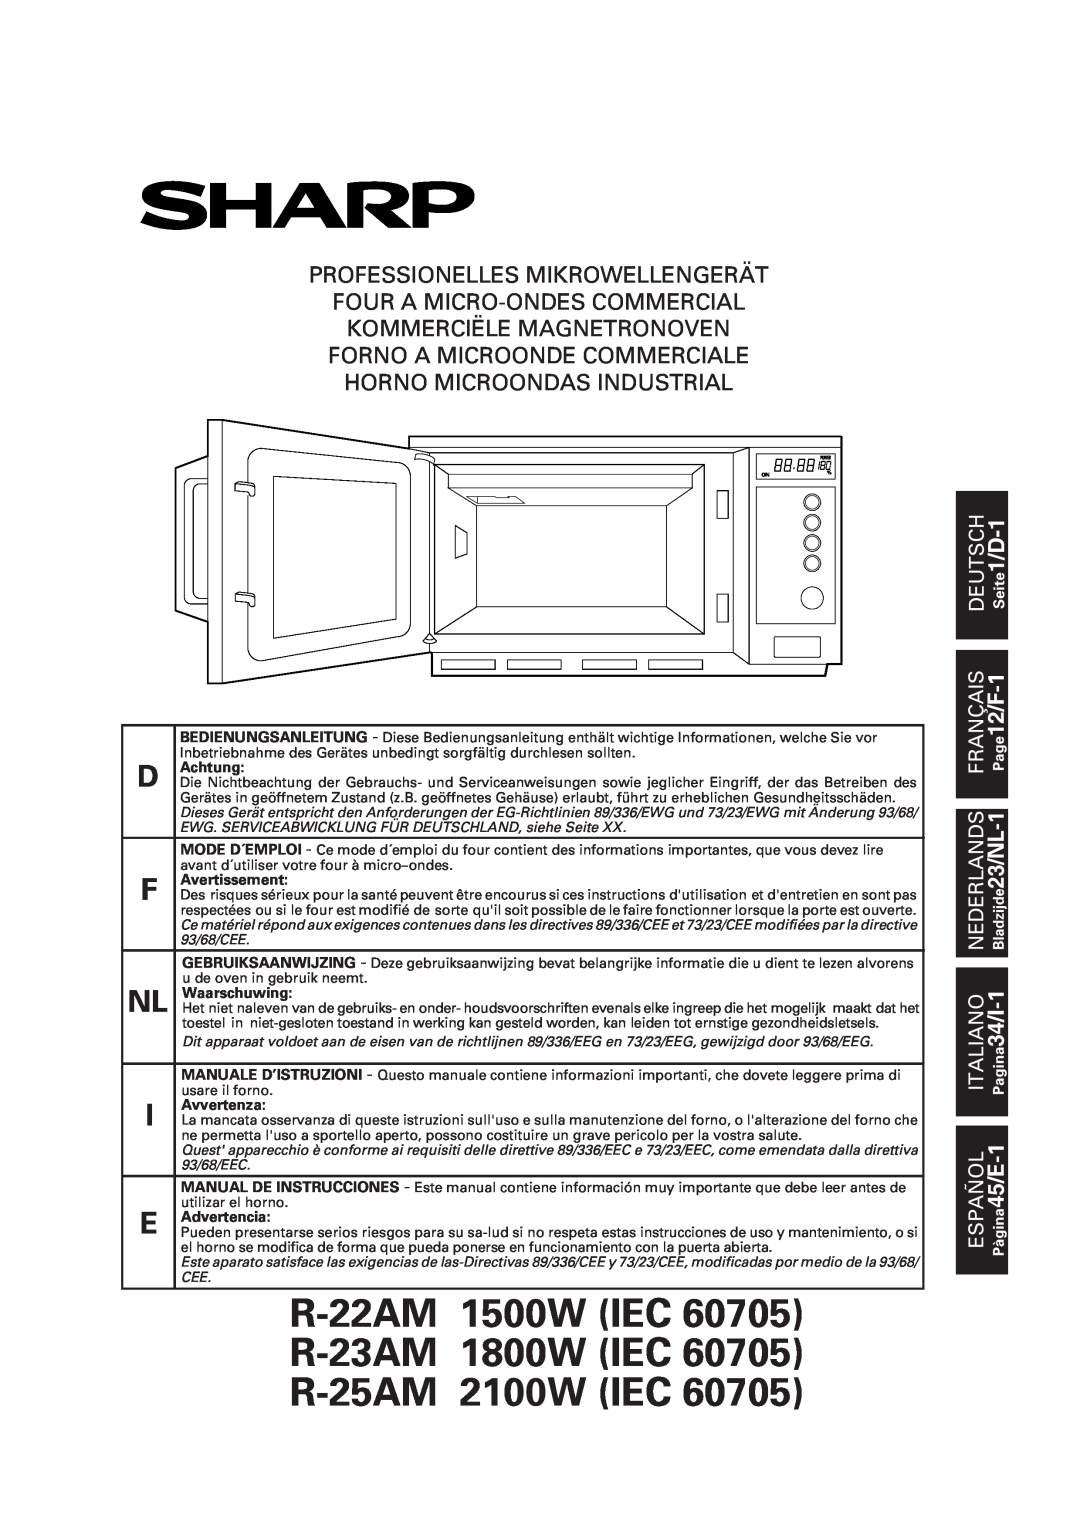 Sharp operation manual R-22AM 1500W IEC 60705 R-23AM 1800W IEC 60705 R-25AM 2100W IEC, Commercial Microwave Oven, 1Page 